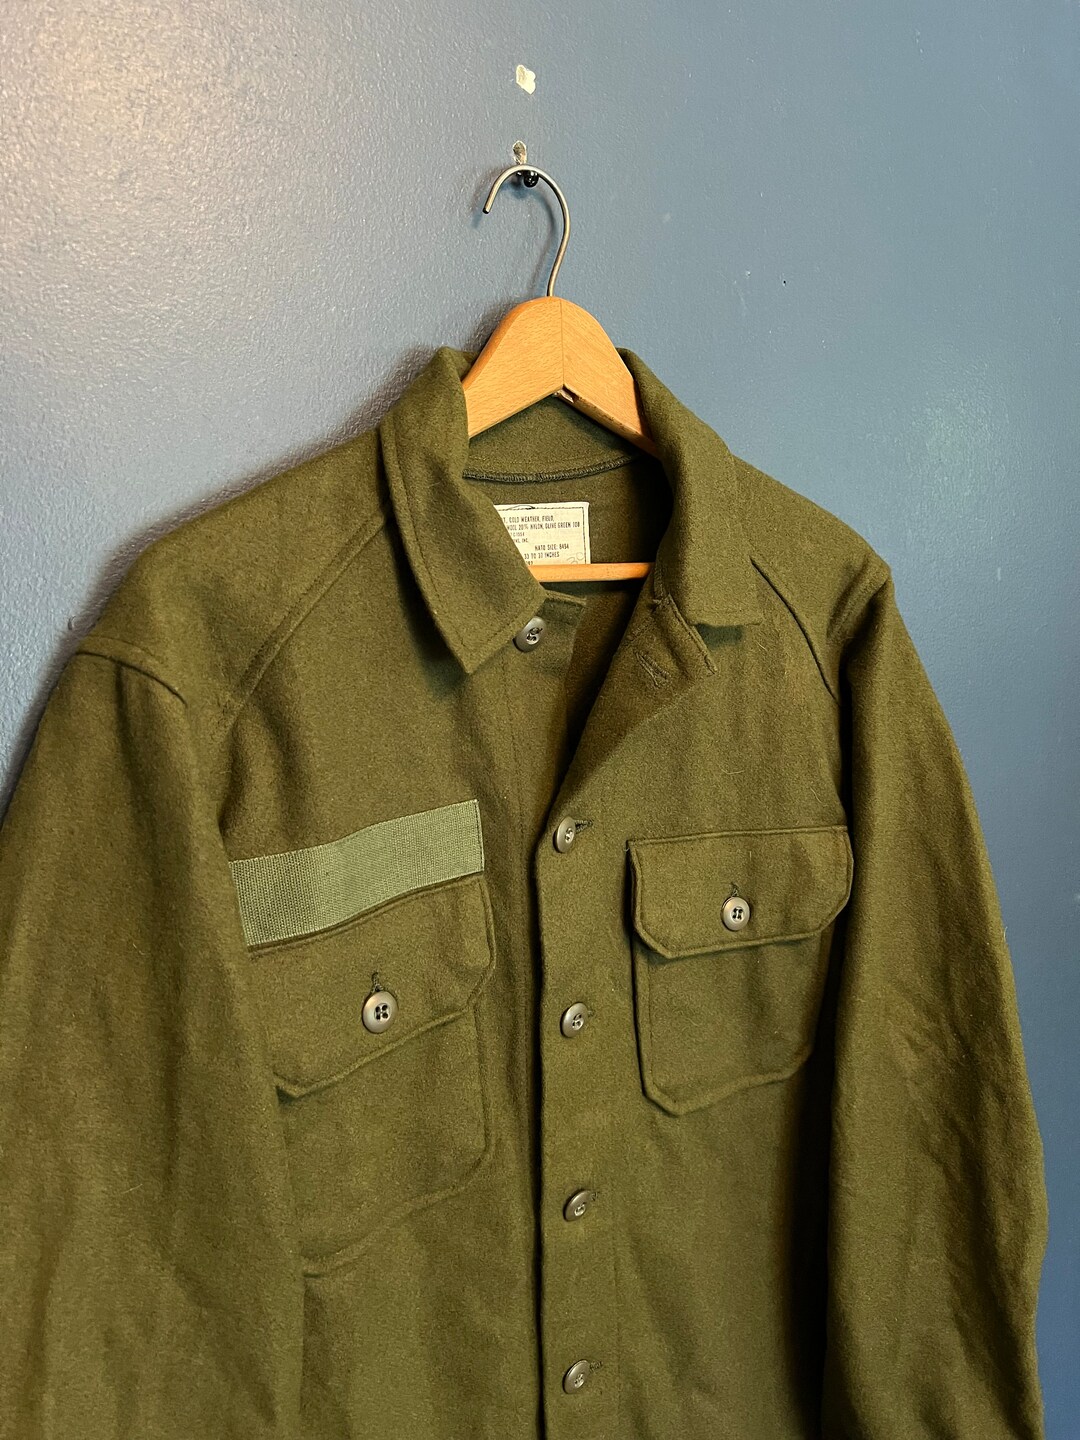 Vintage 70s OG 108 US Army Olive Green Wool Button up Shirt Size Small ...